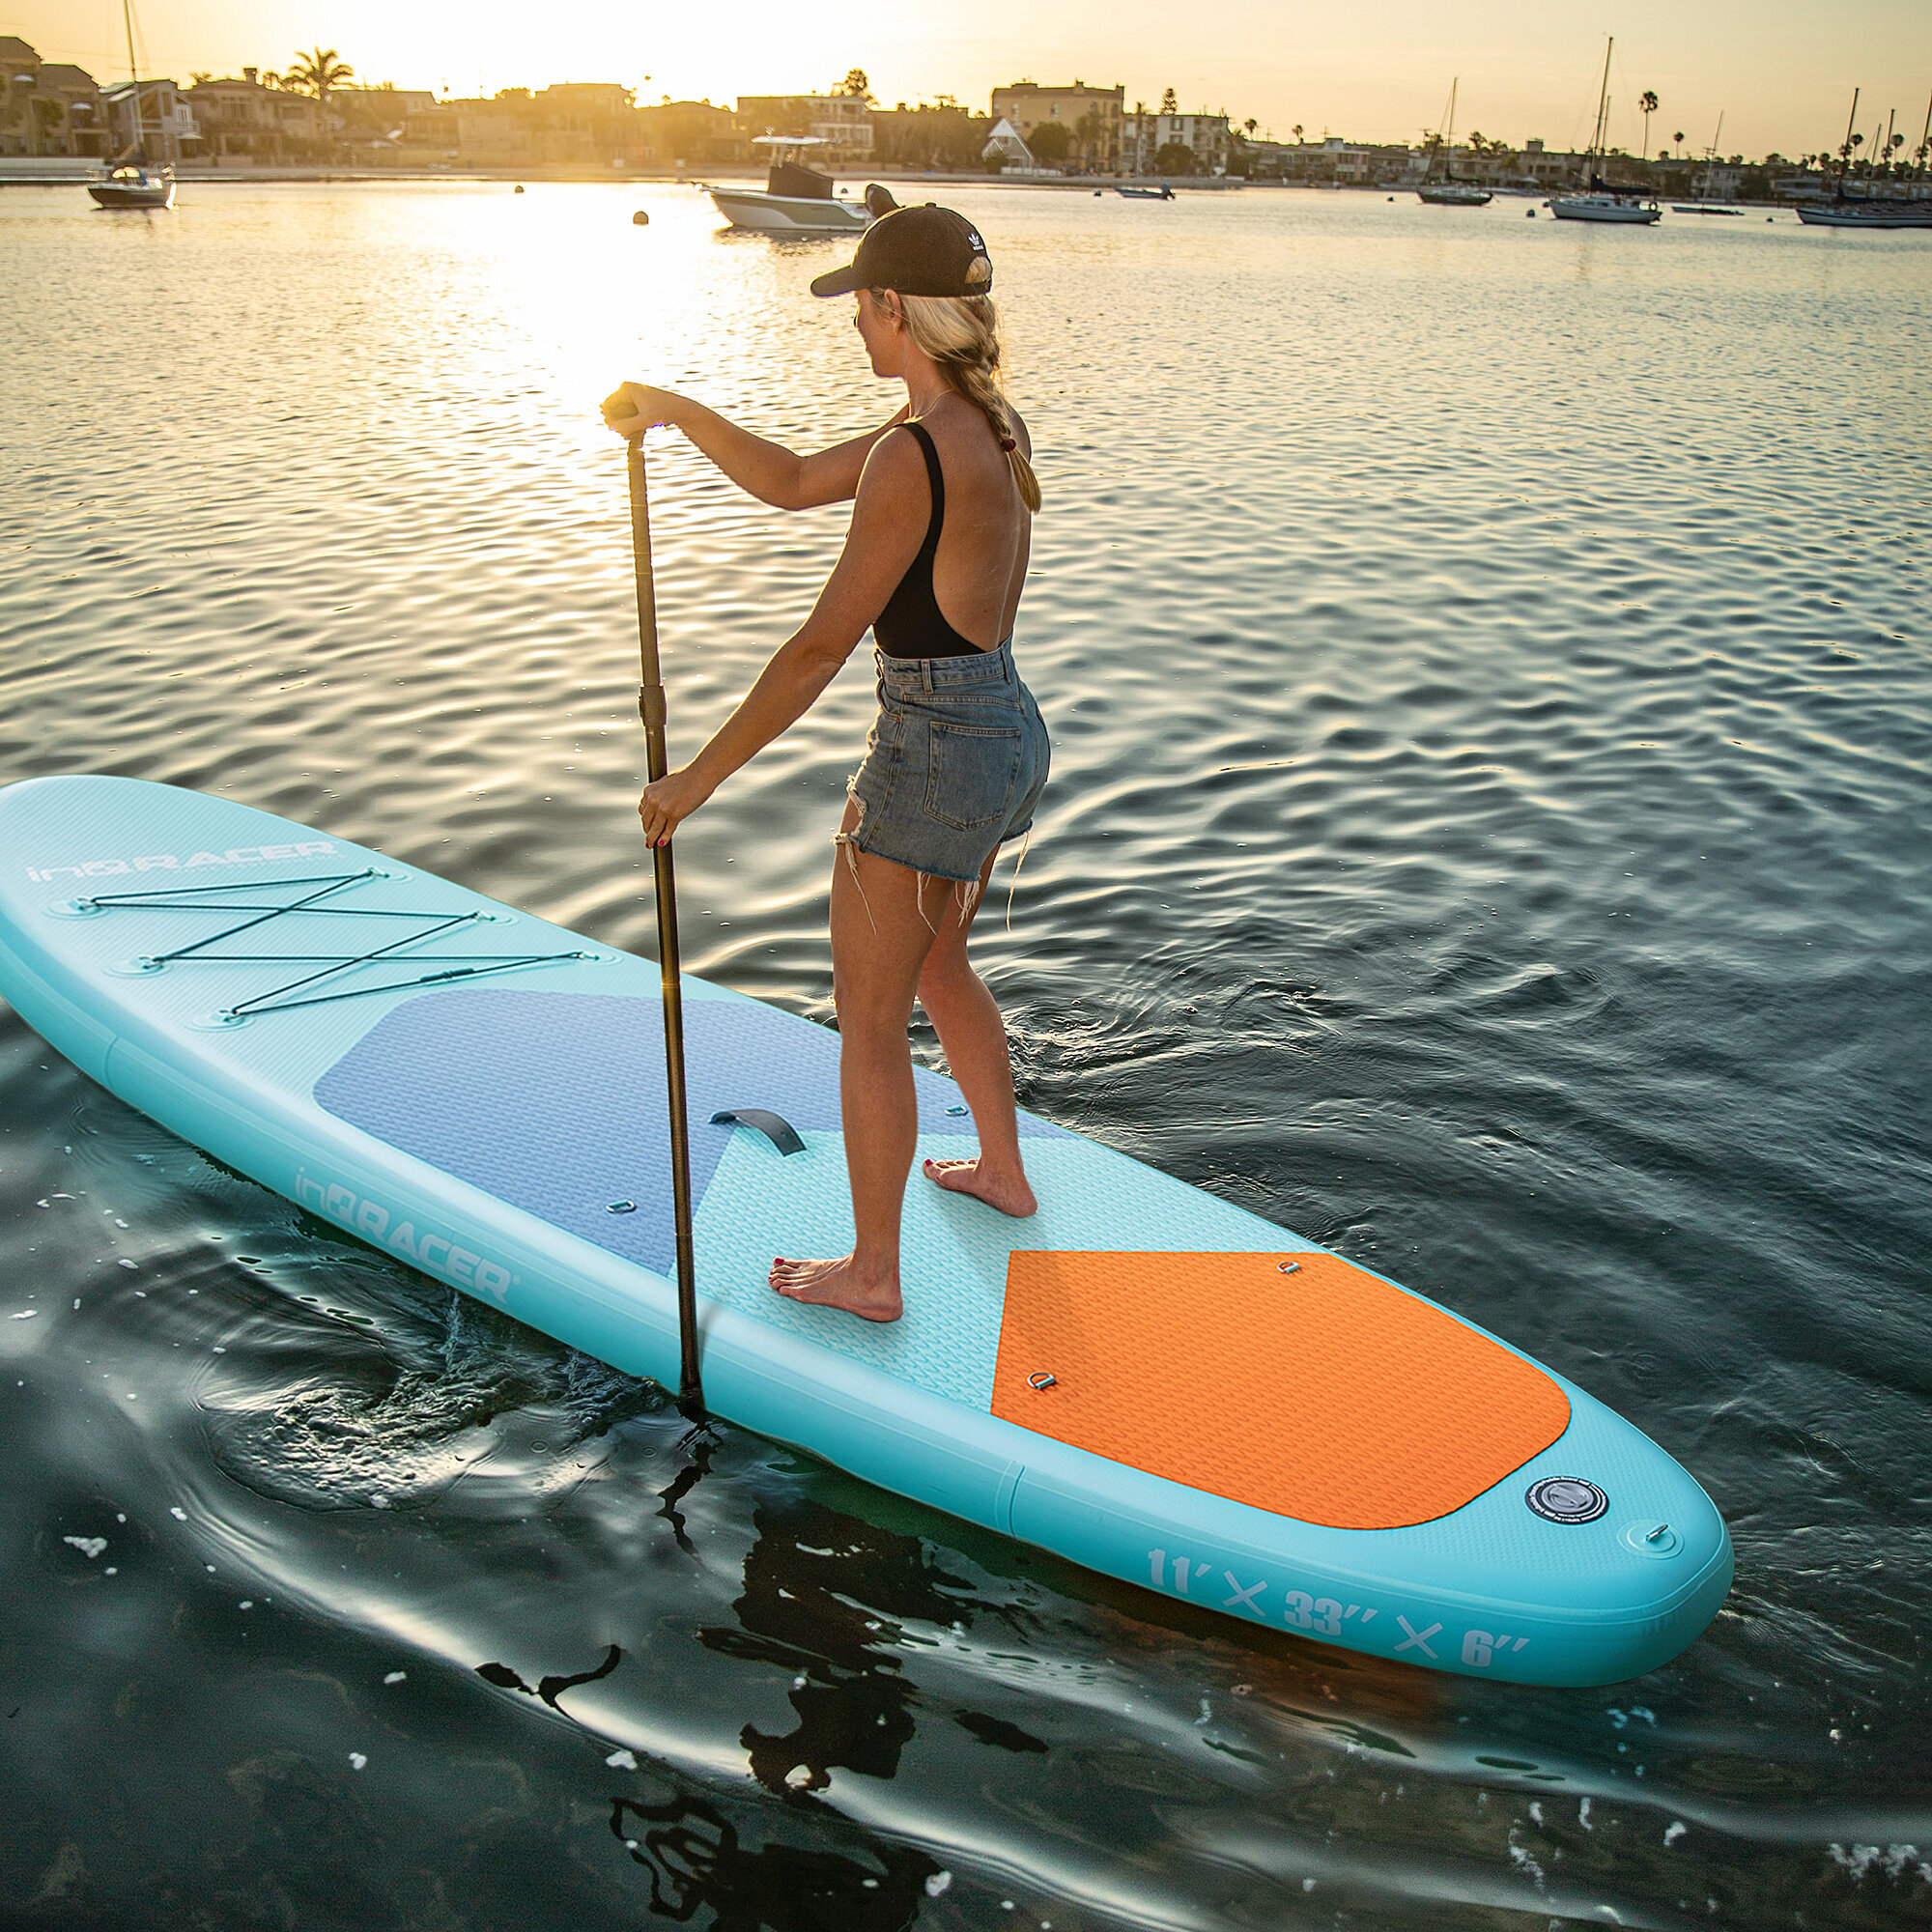 EDGEWOOD Inflatable Stand Up Paddle Board, 10'6